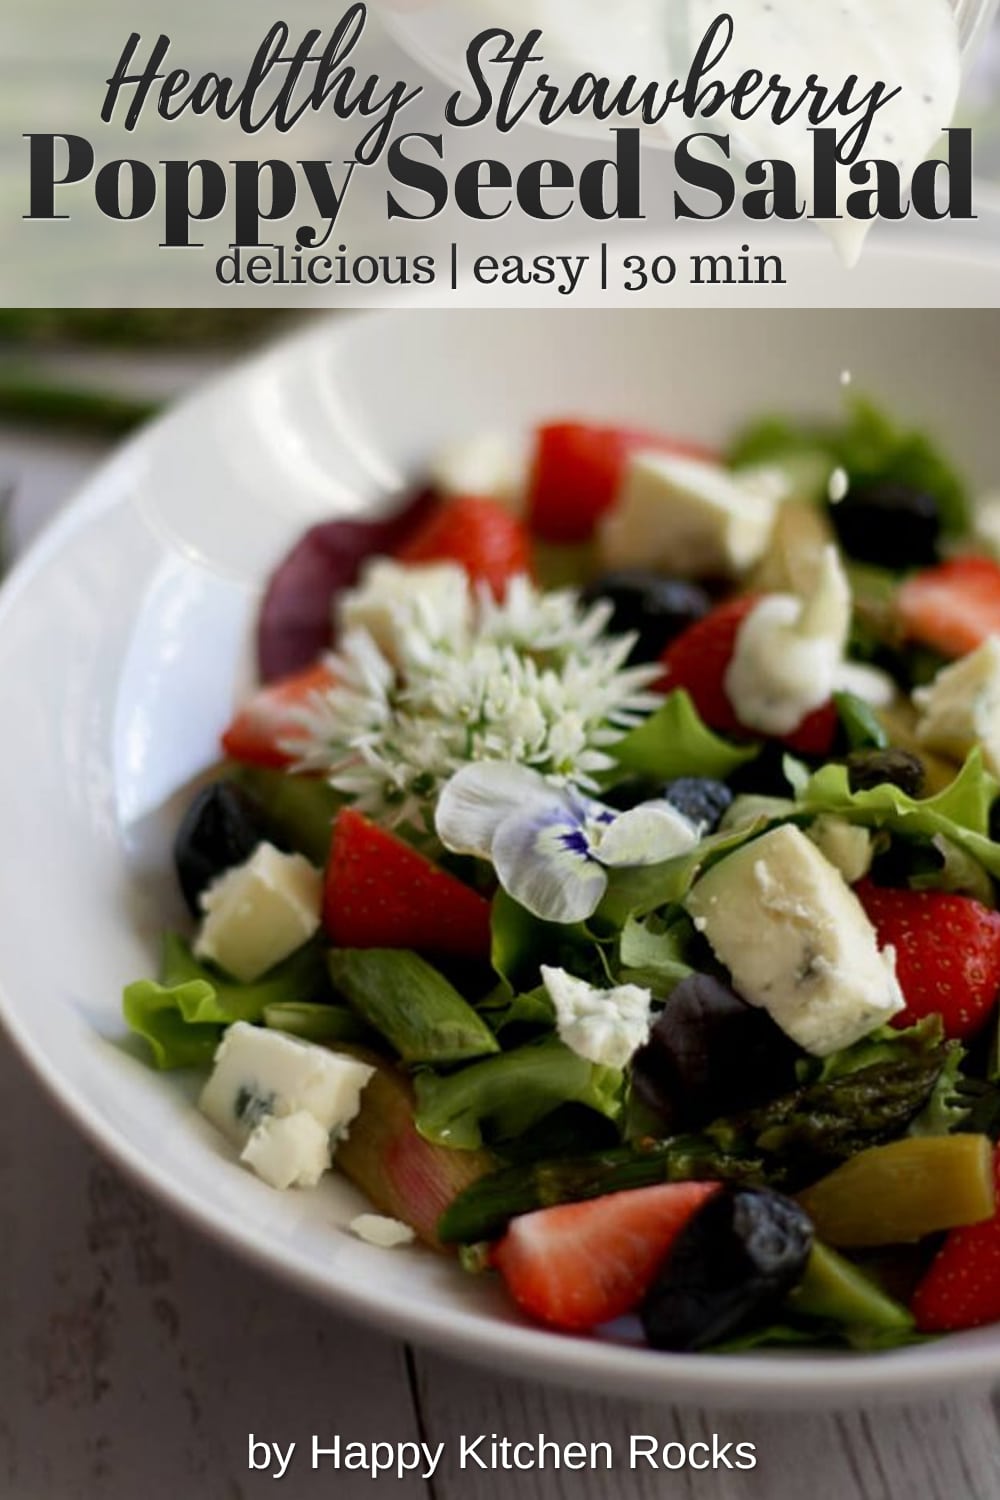 Strawberry Poppy Seed Salad with Asparagus and Rhubarb Closeup Collage with Text Overlay